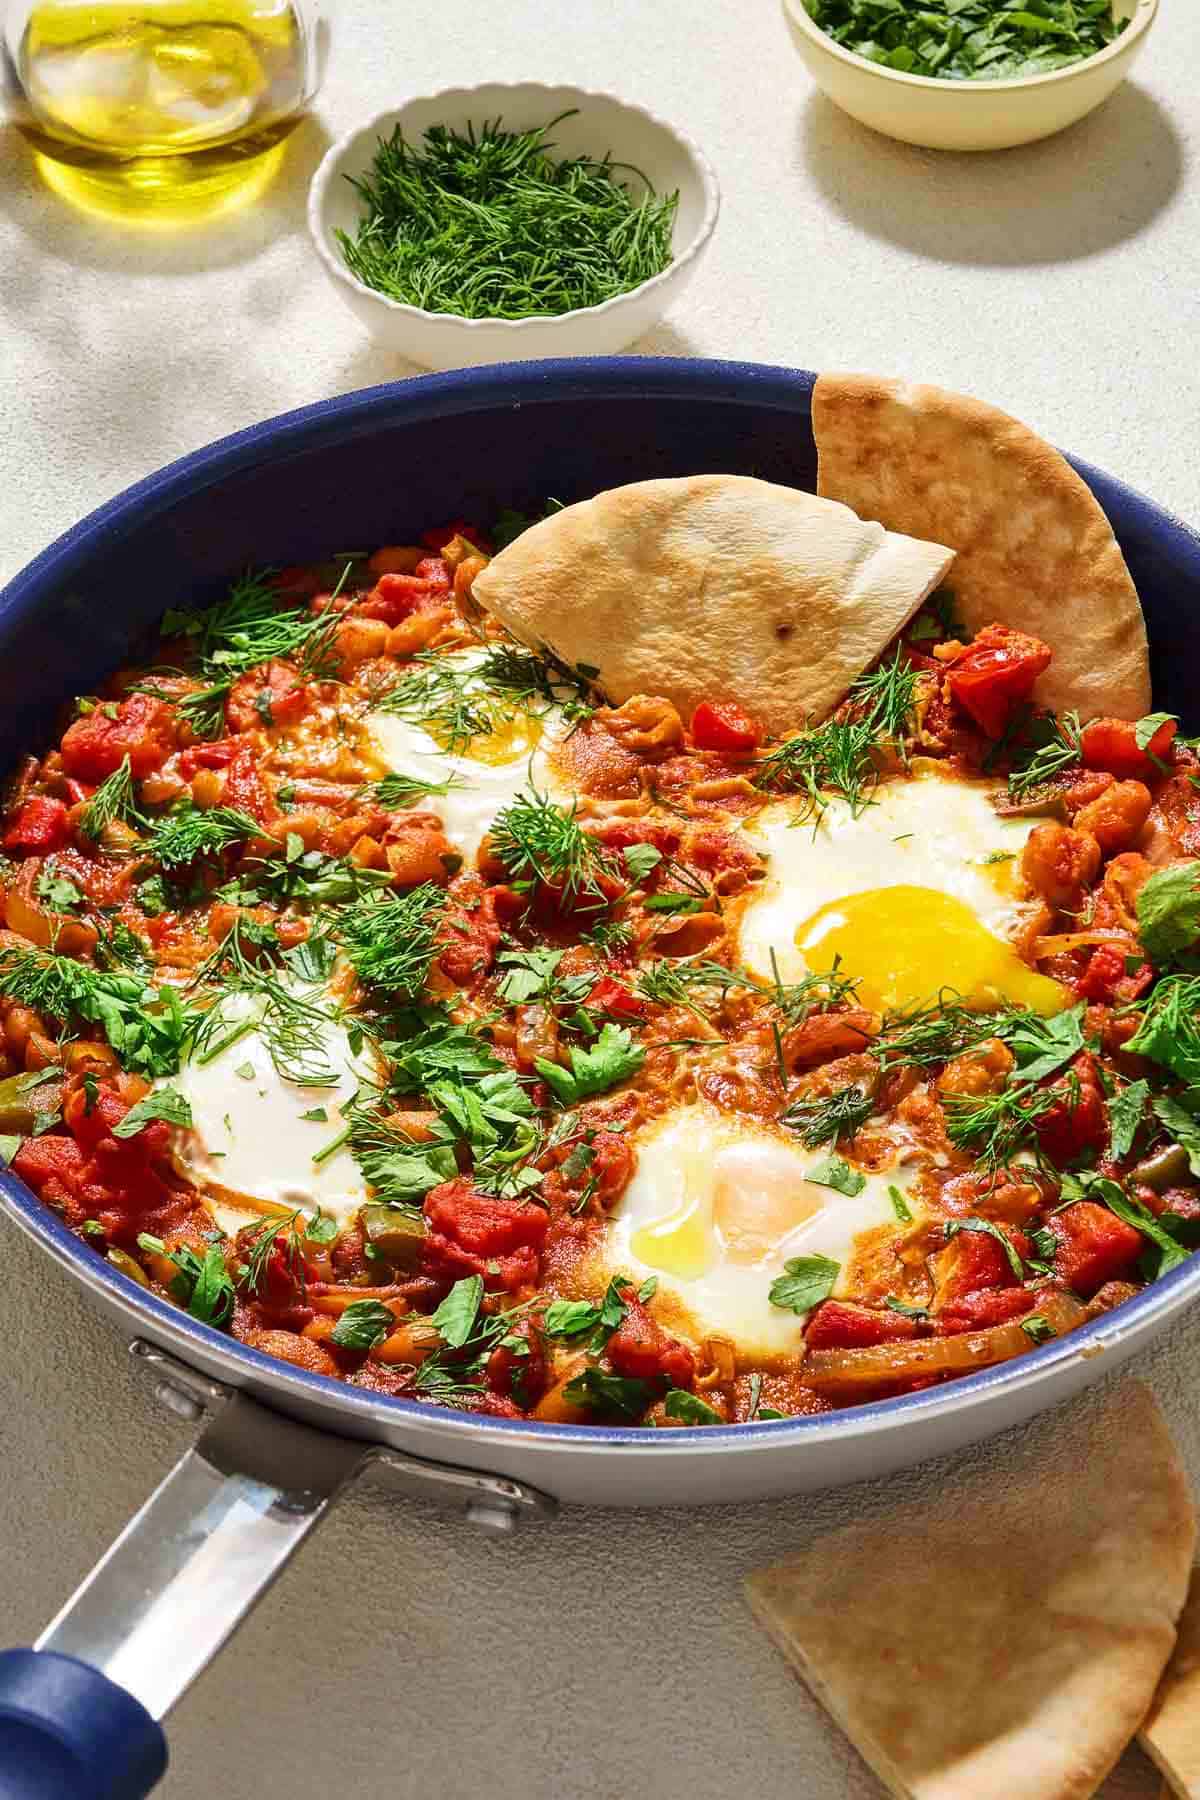 White bean shakshuka garnished with dill and parsley in a skillet with 2 pieces of pita bread. Next to this are small bowls of dill and parsley, a cup of olive oil, and more pieces of pita bread.